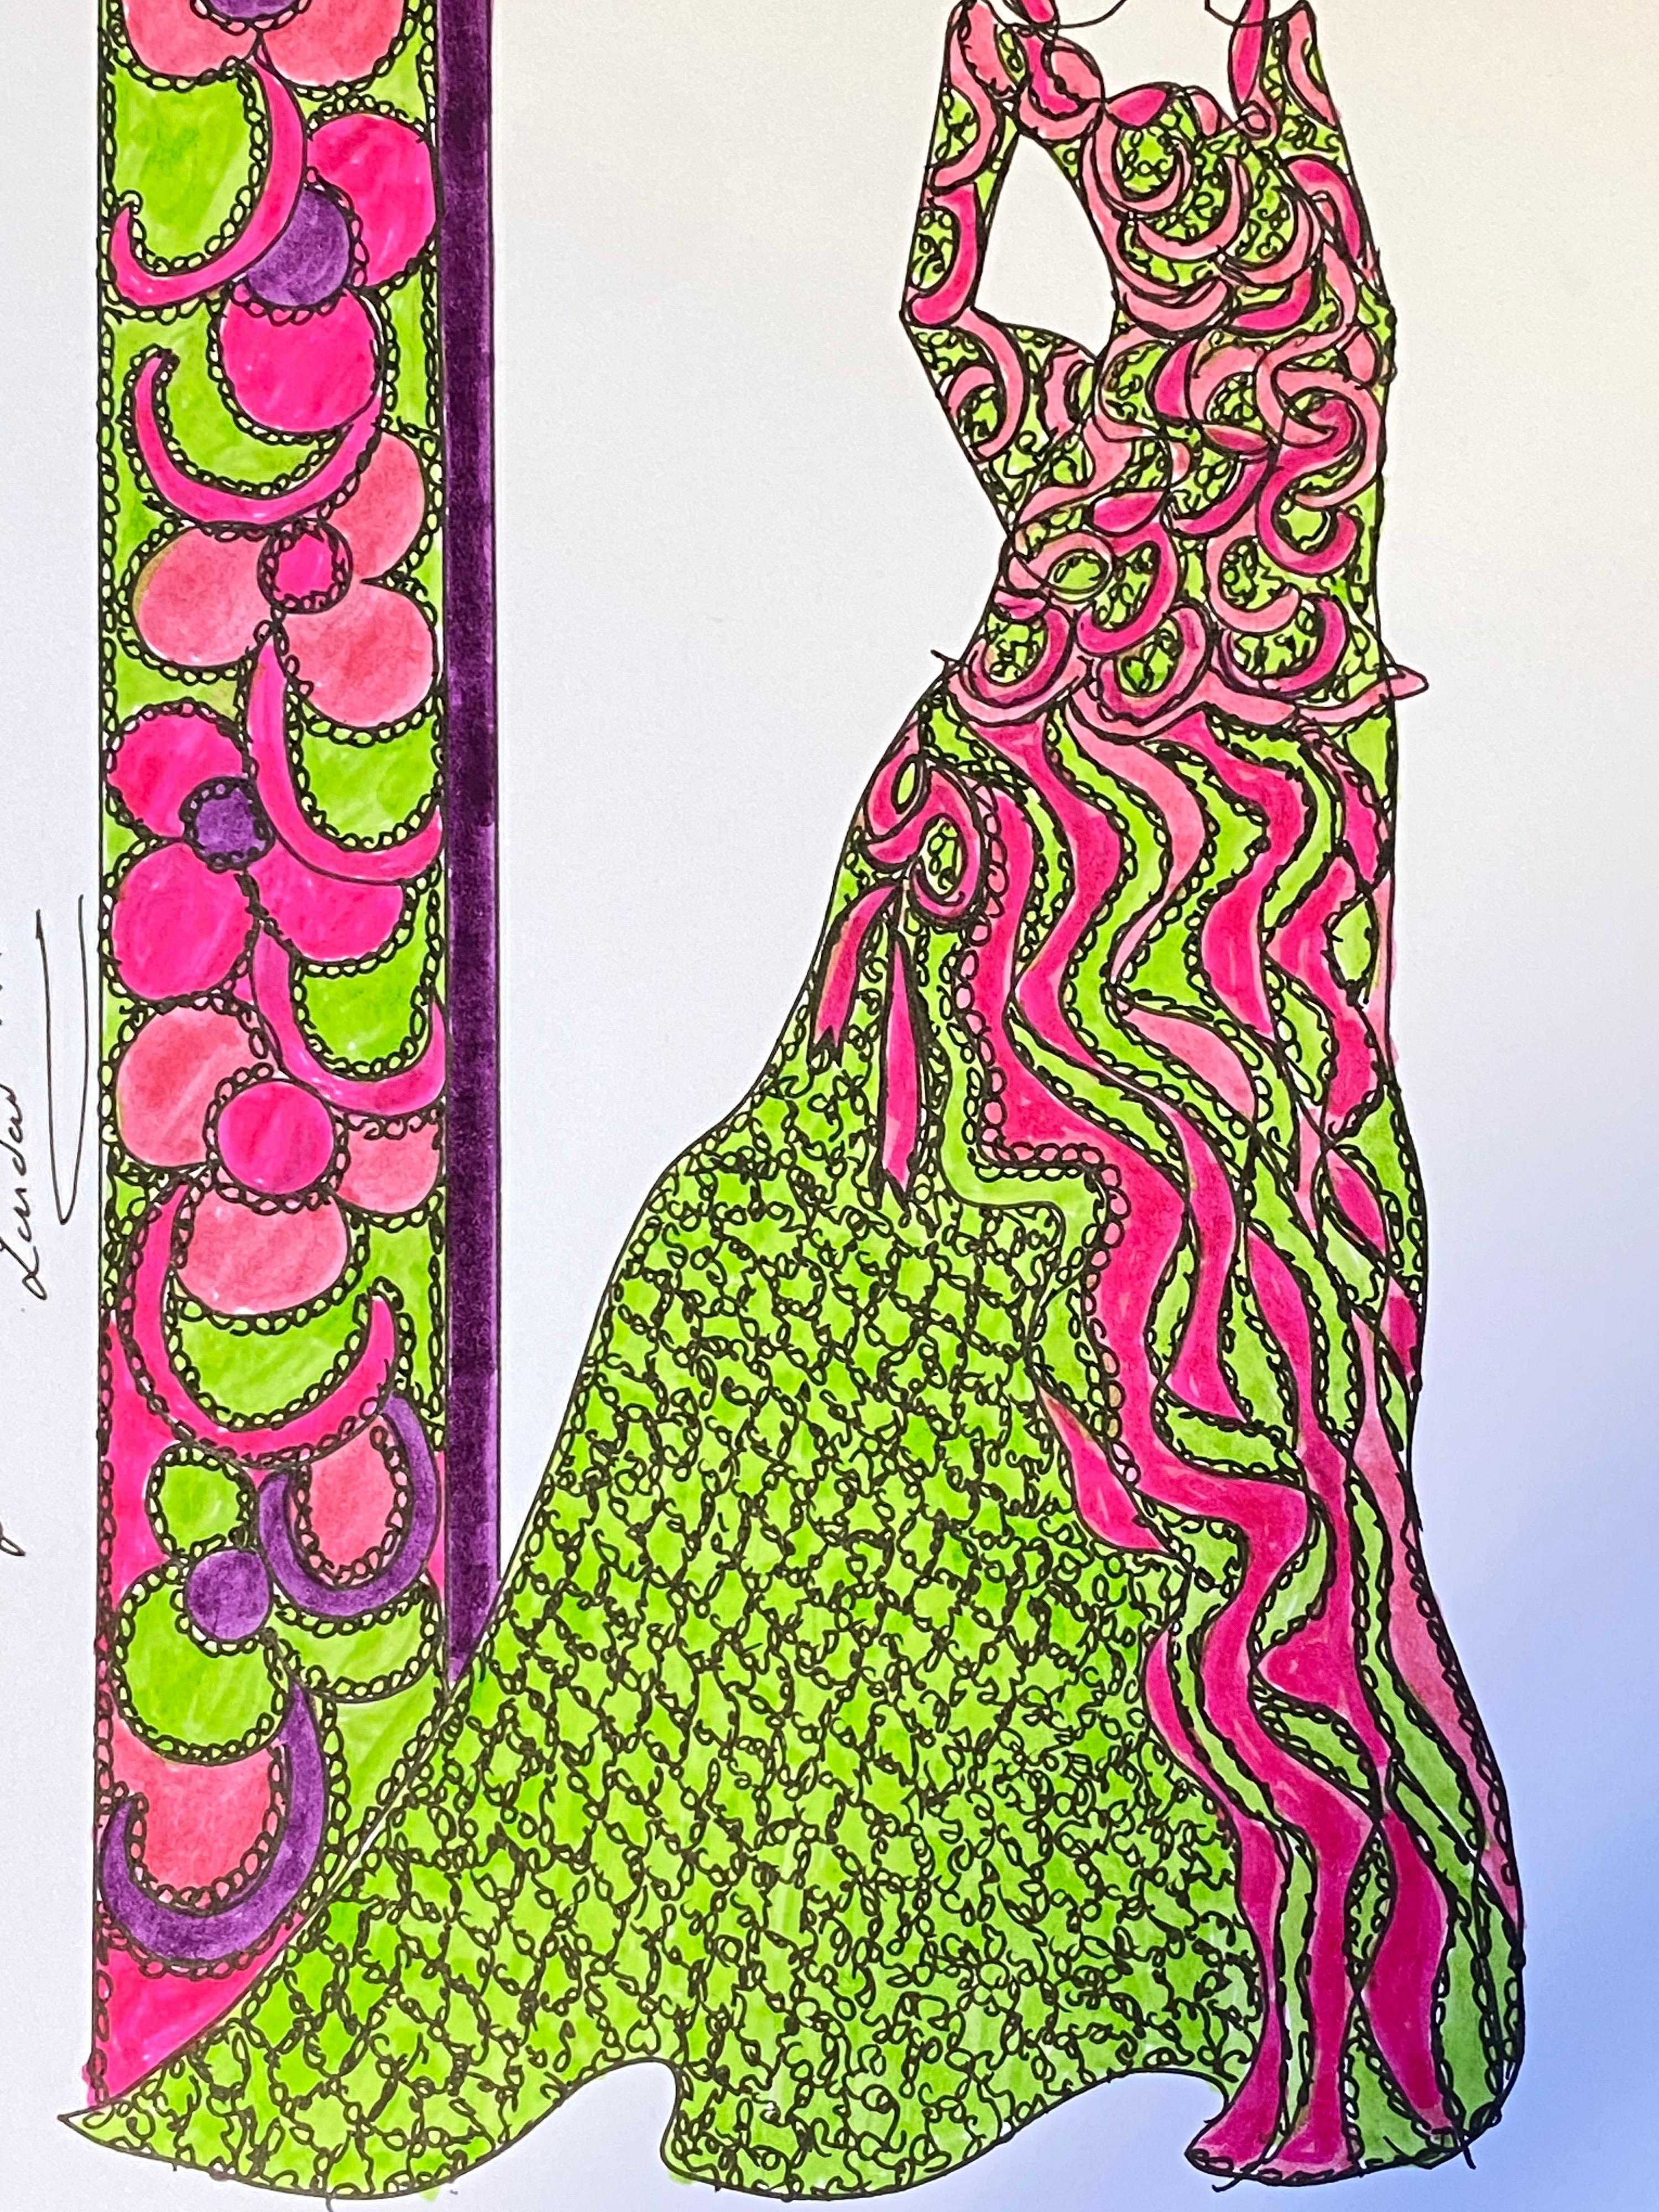 Original fashion design illustration
by Roz Jennings, British
watercolor and ink on card, unframed
size: 12 x 8.25 inches
condition: very good

A beautifully colorful and characterful original artwork by British fashion designer, Roz Jennings.